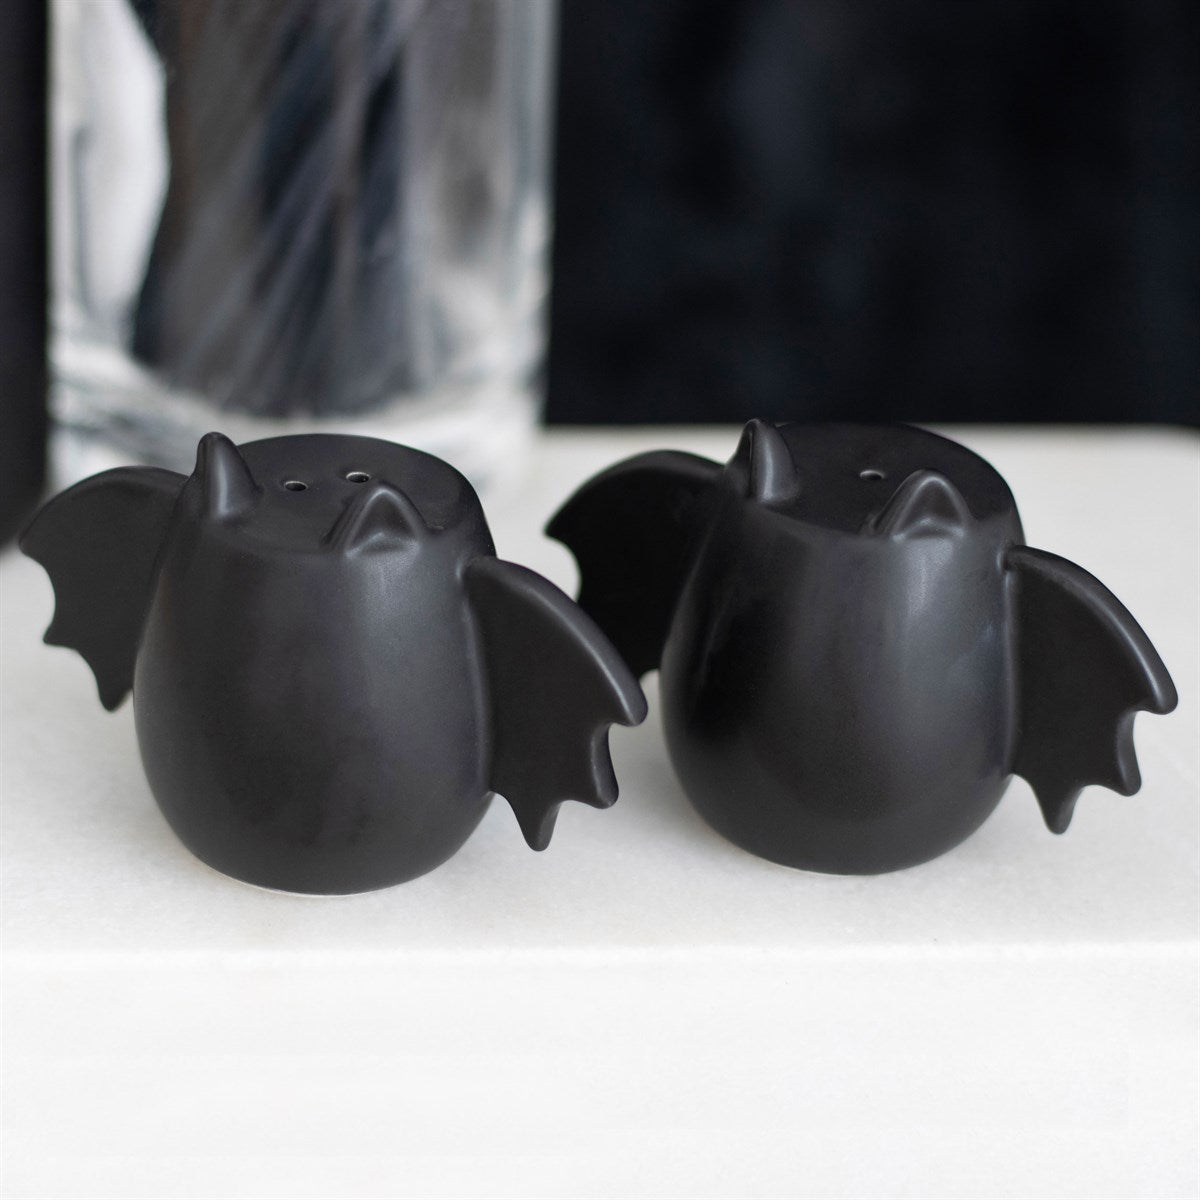 Bat Wing Salt and Pepper Shakers NEW!